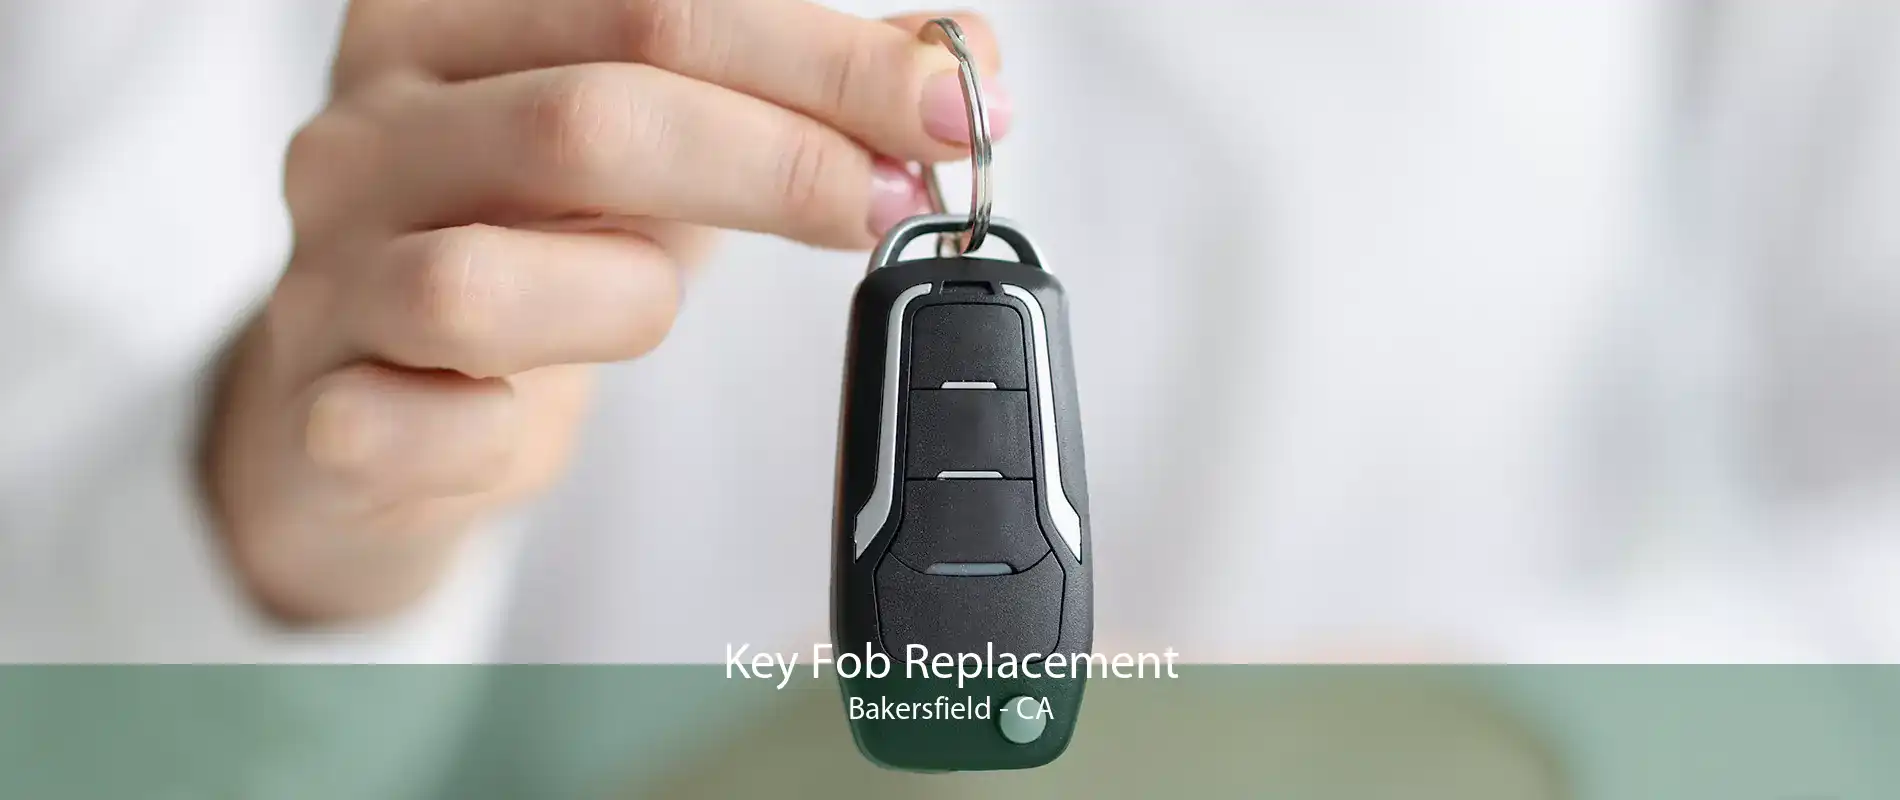 Key Fob Replacement Bakersfield - CA